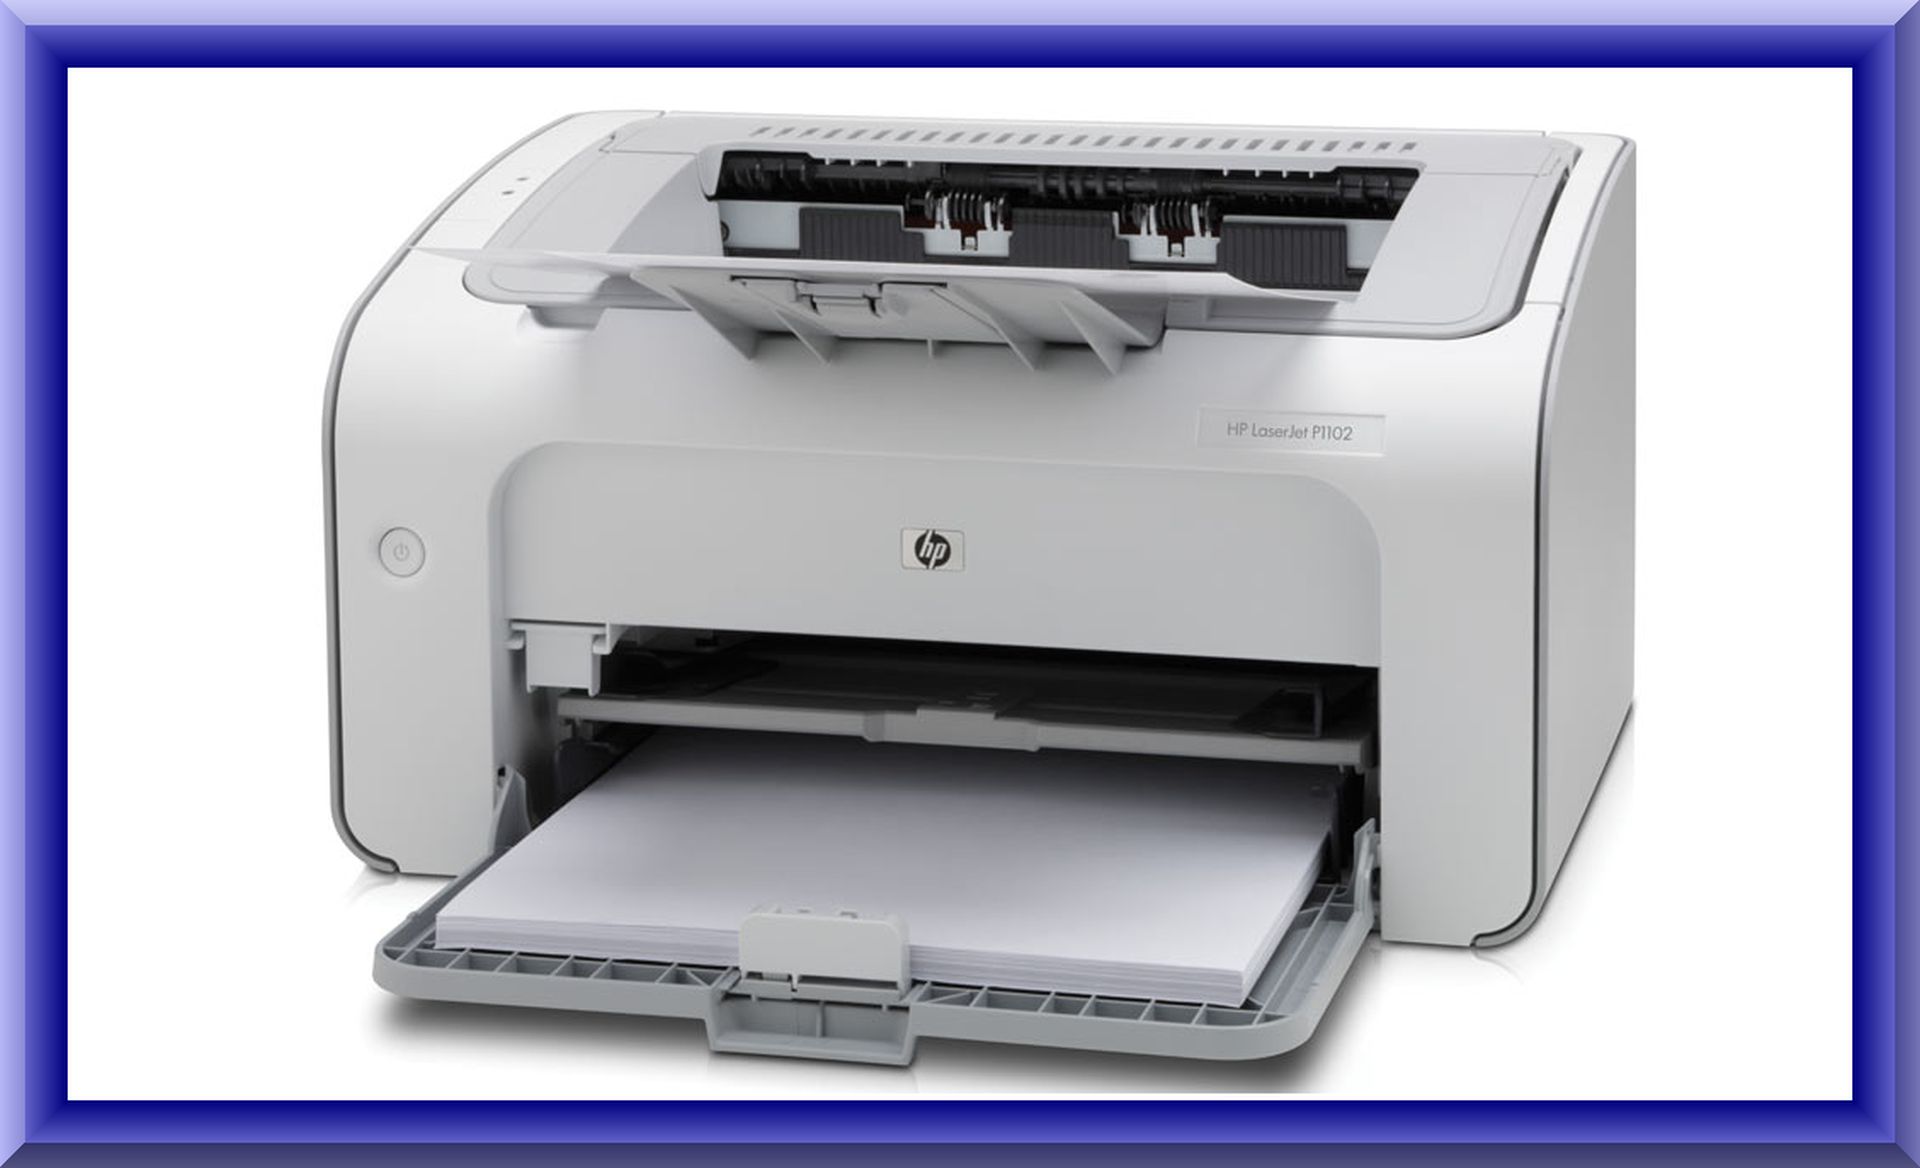 Software driver for hp laserjet p1102w